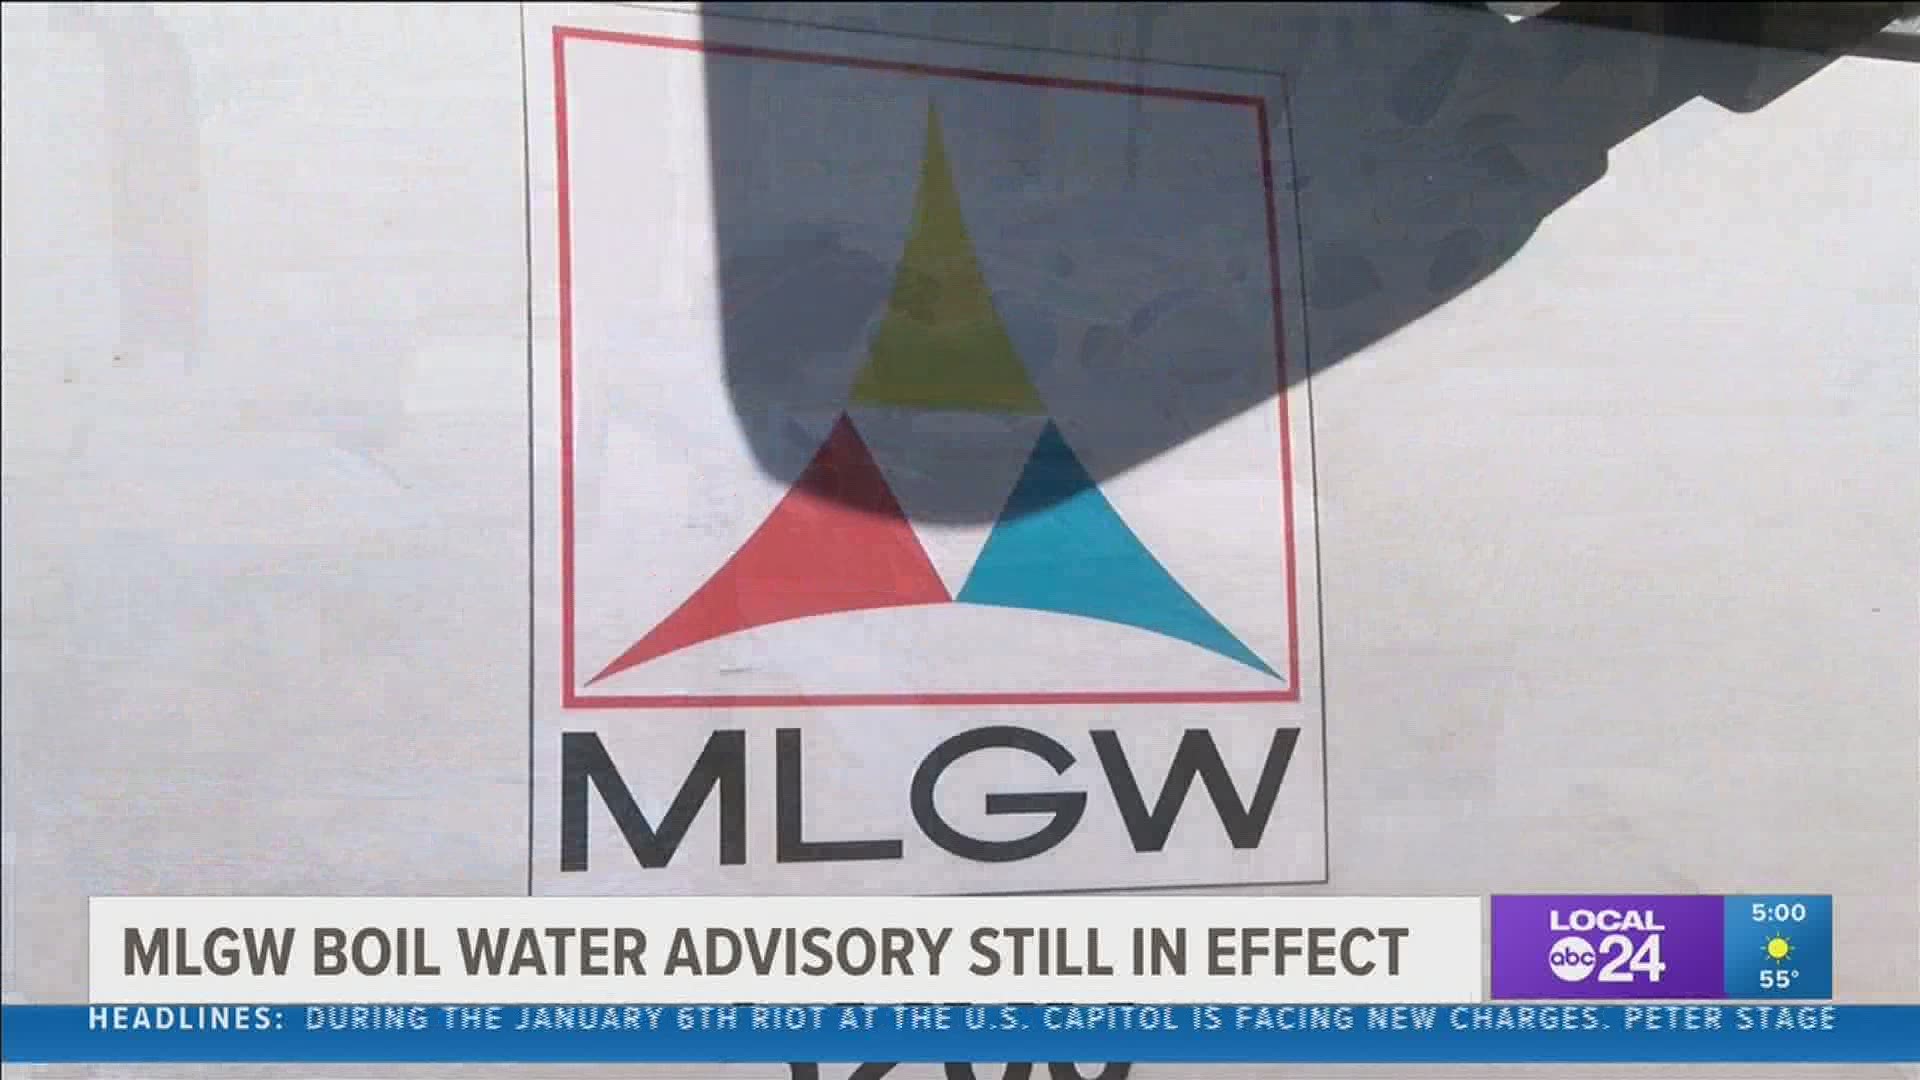 Local 24 News’ Brad Broders has the latest on the boil water advisory for MLGW customers in Memphis and Shelby County.